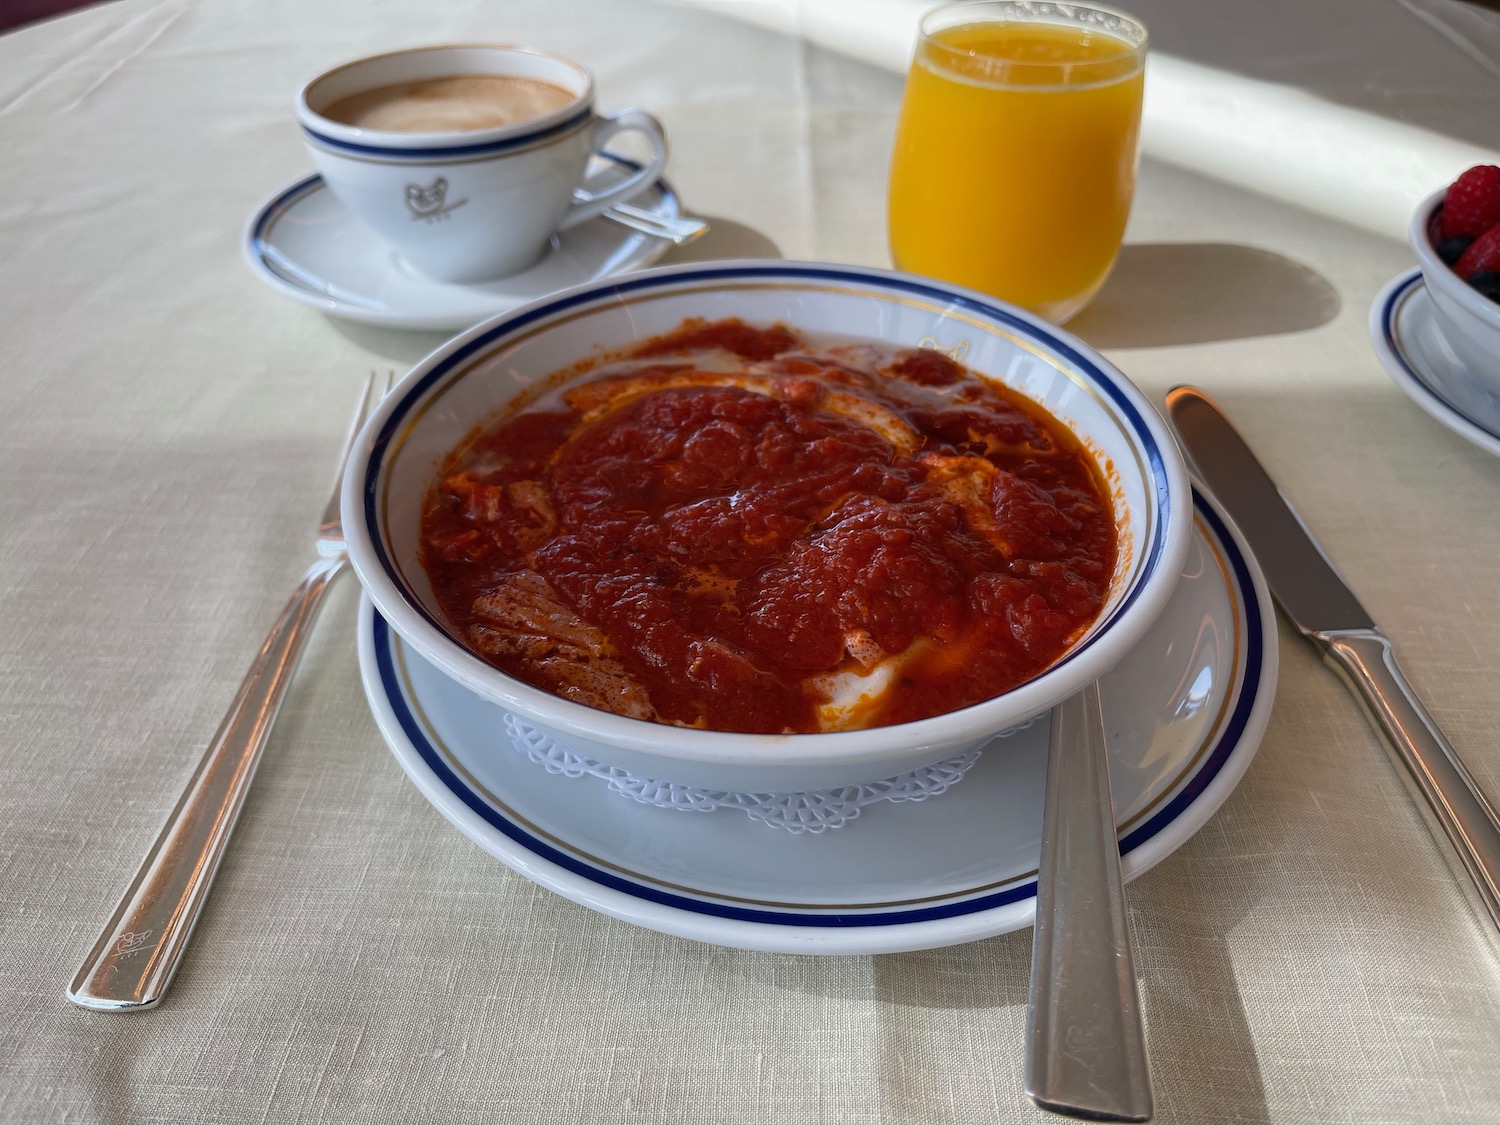 a bowl of red sauce and a cup of coffee